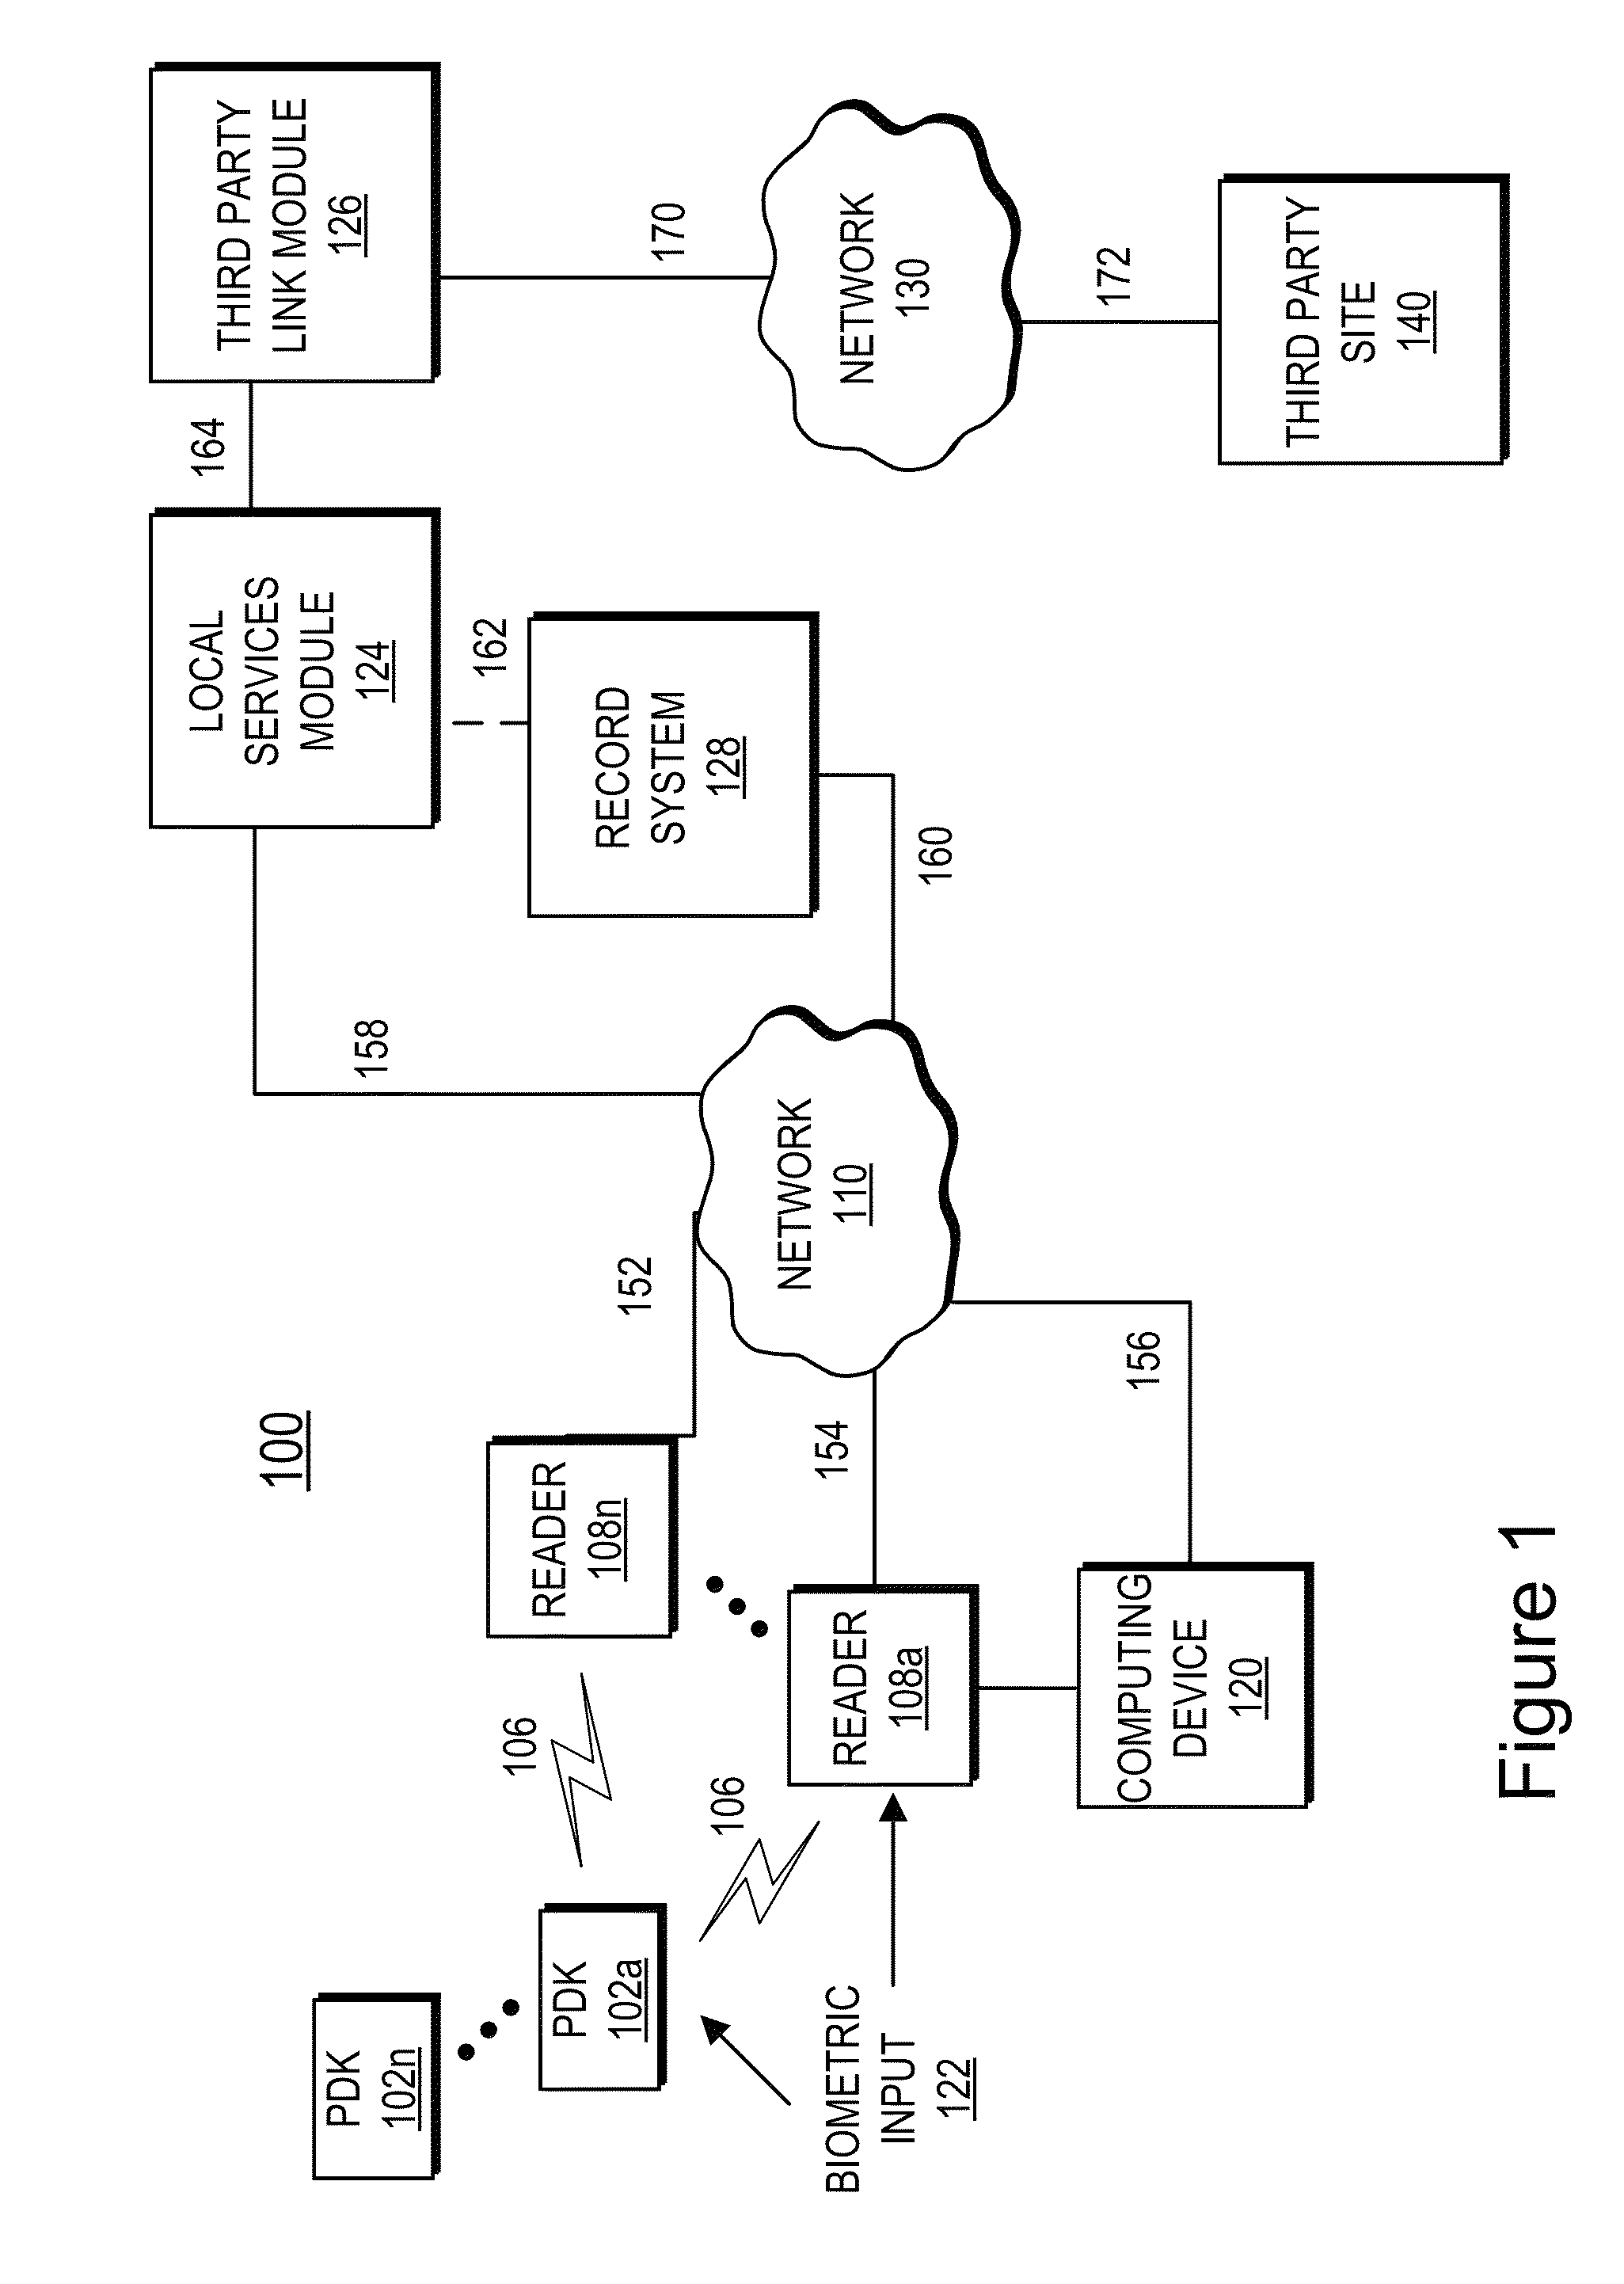 Proximity-based system for automatic application initialization